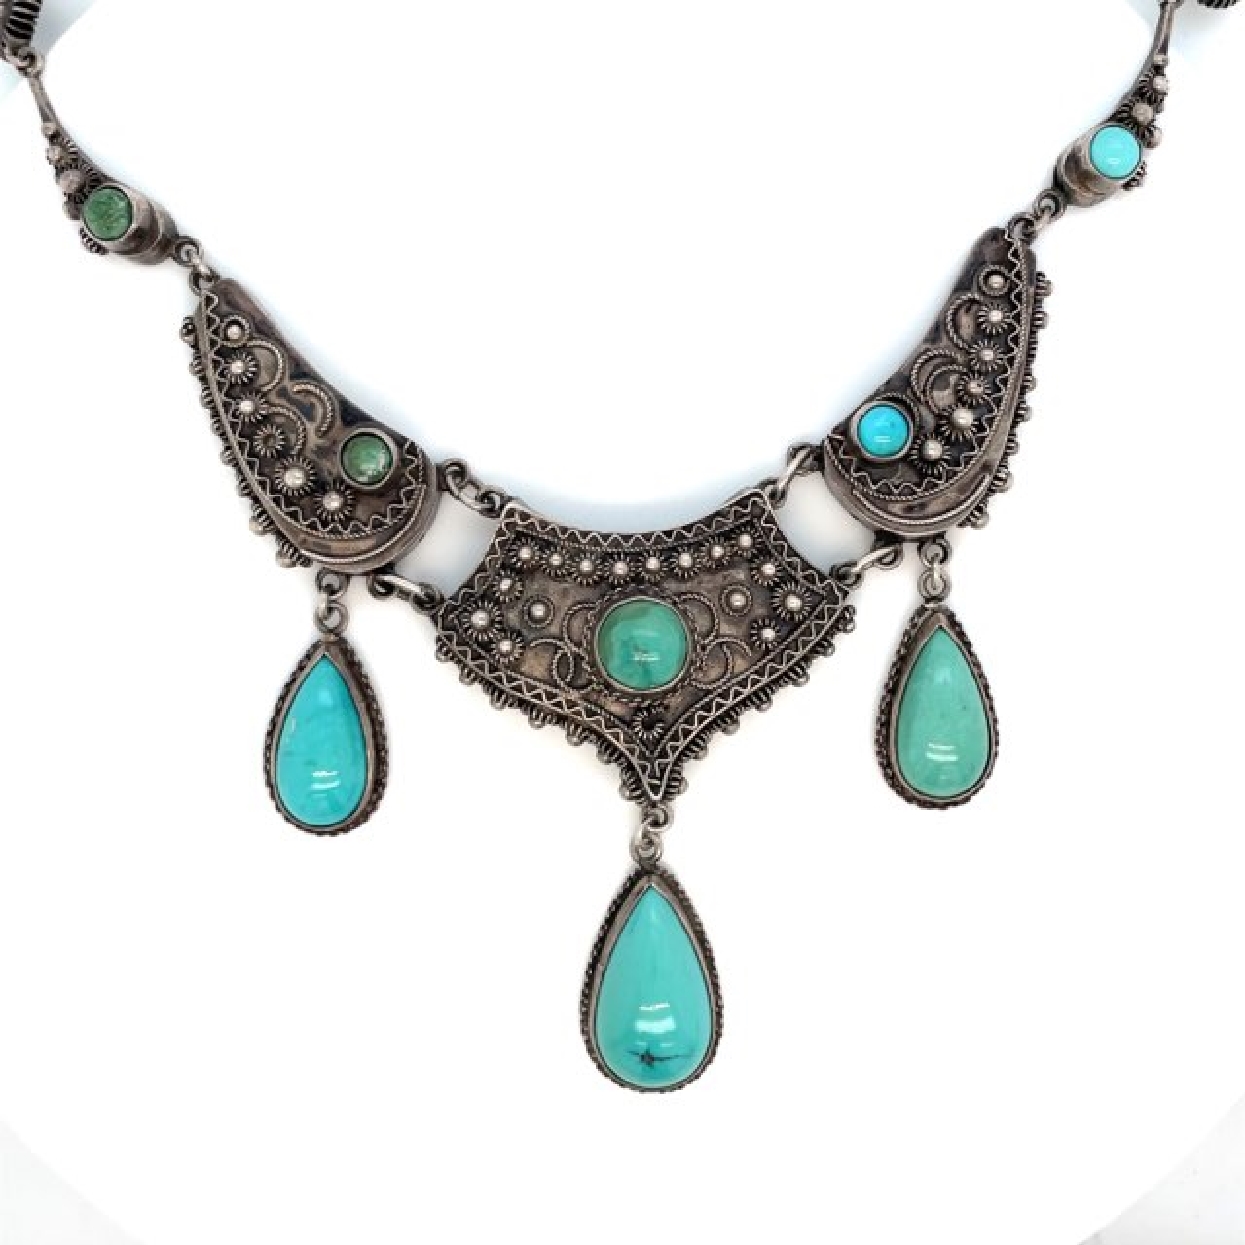 Antique Sterling Silver Tibetan Necklace with Turquoise

16 Inches